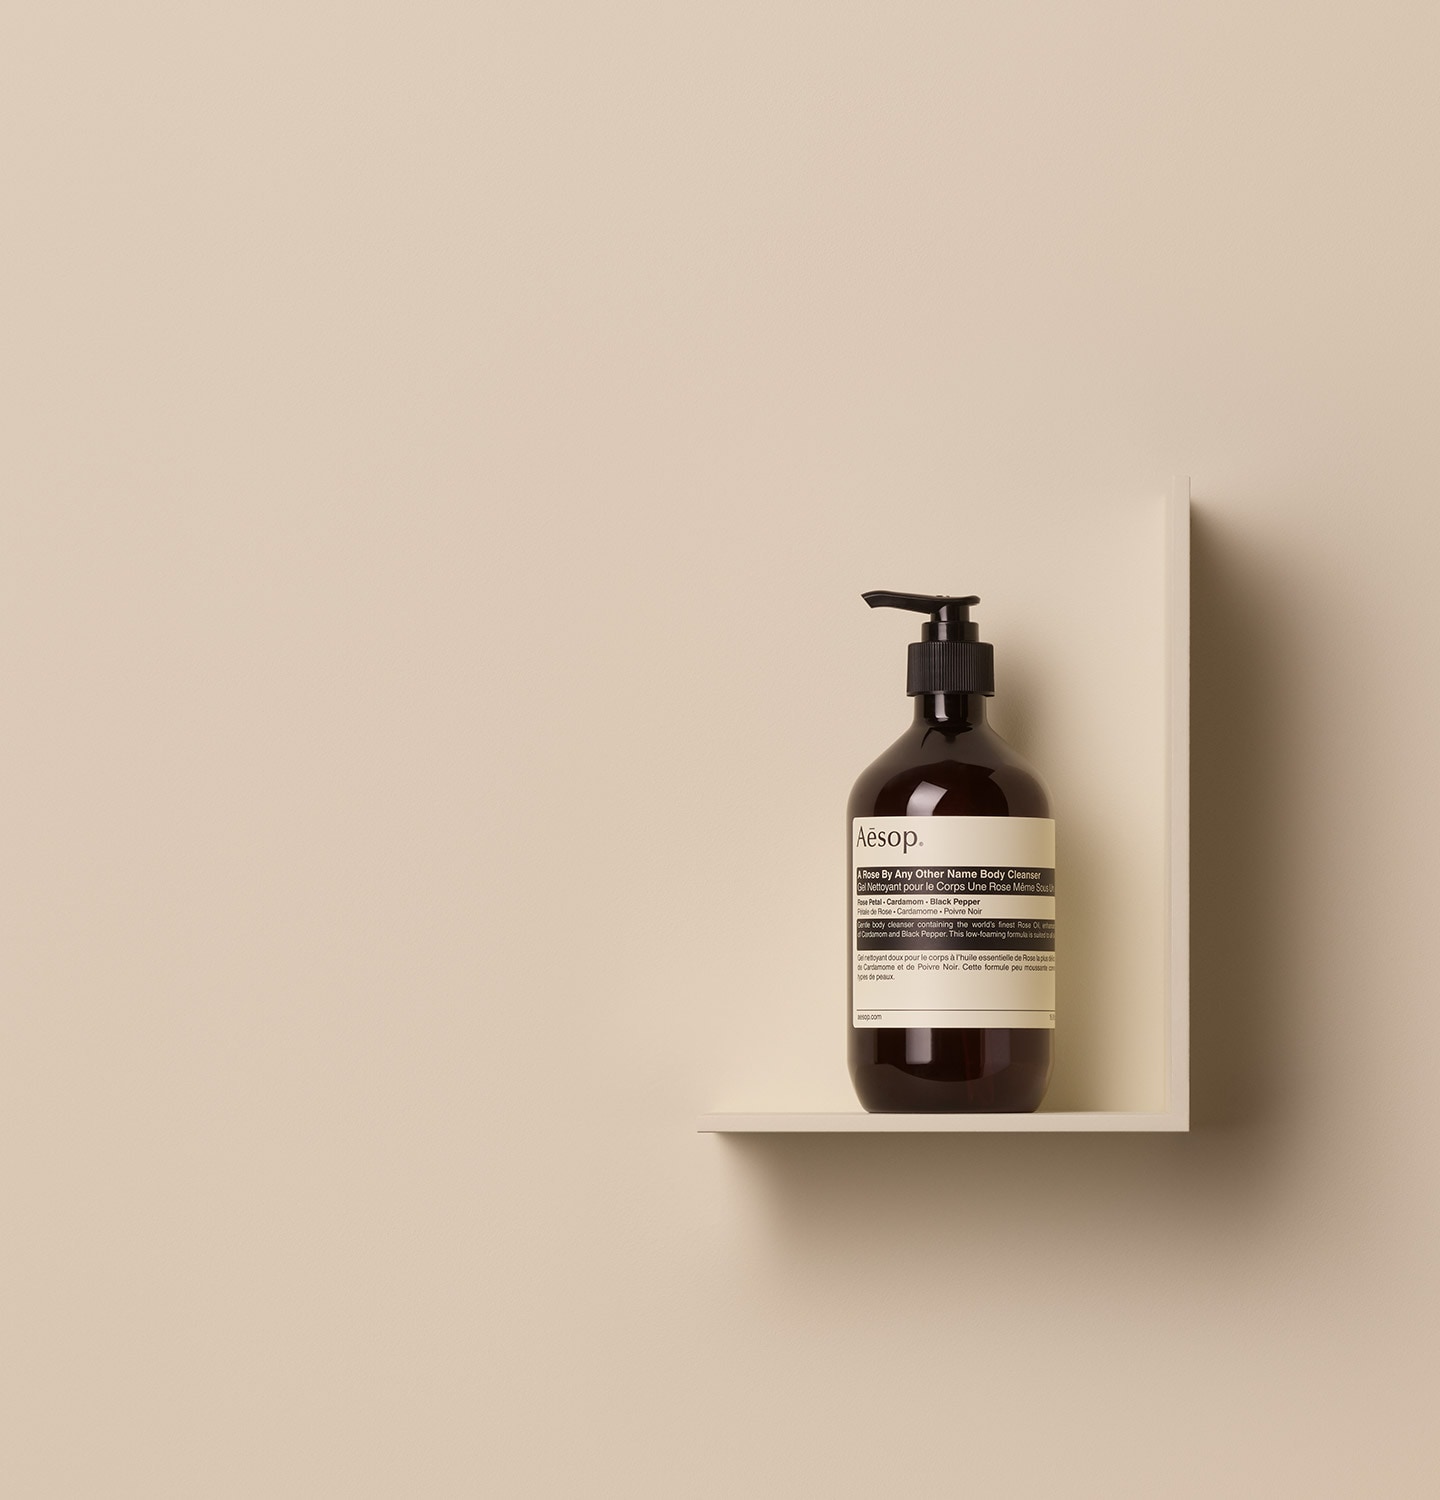 Aesop A Rose By Any Other Name Body Cleanser in 500ml amber pump bottle placed on a shelf in a beige surface